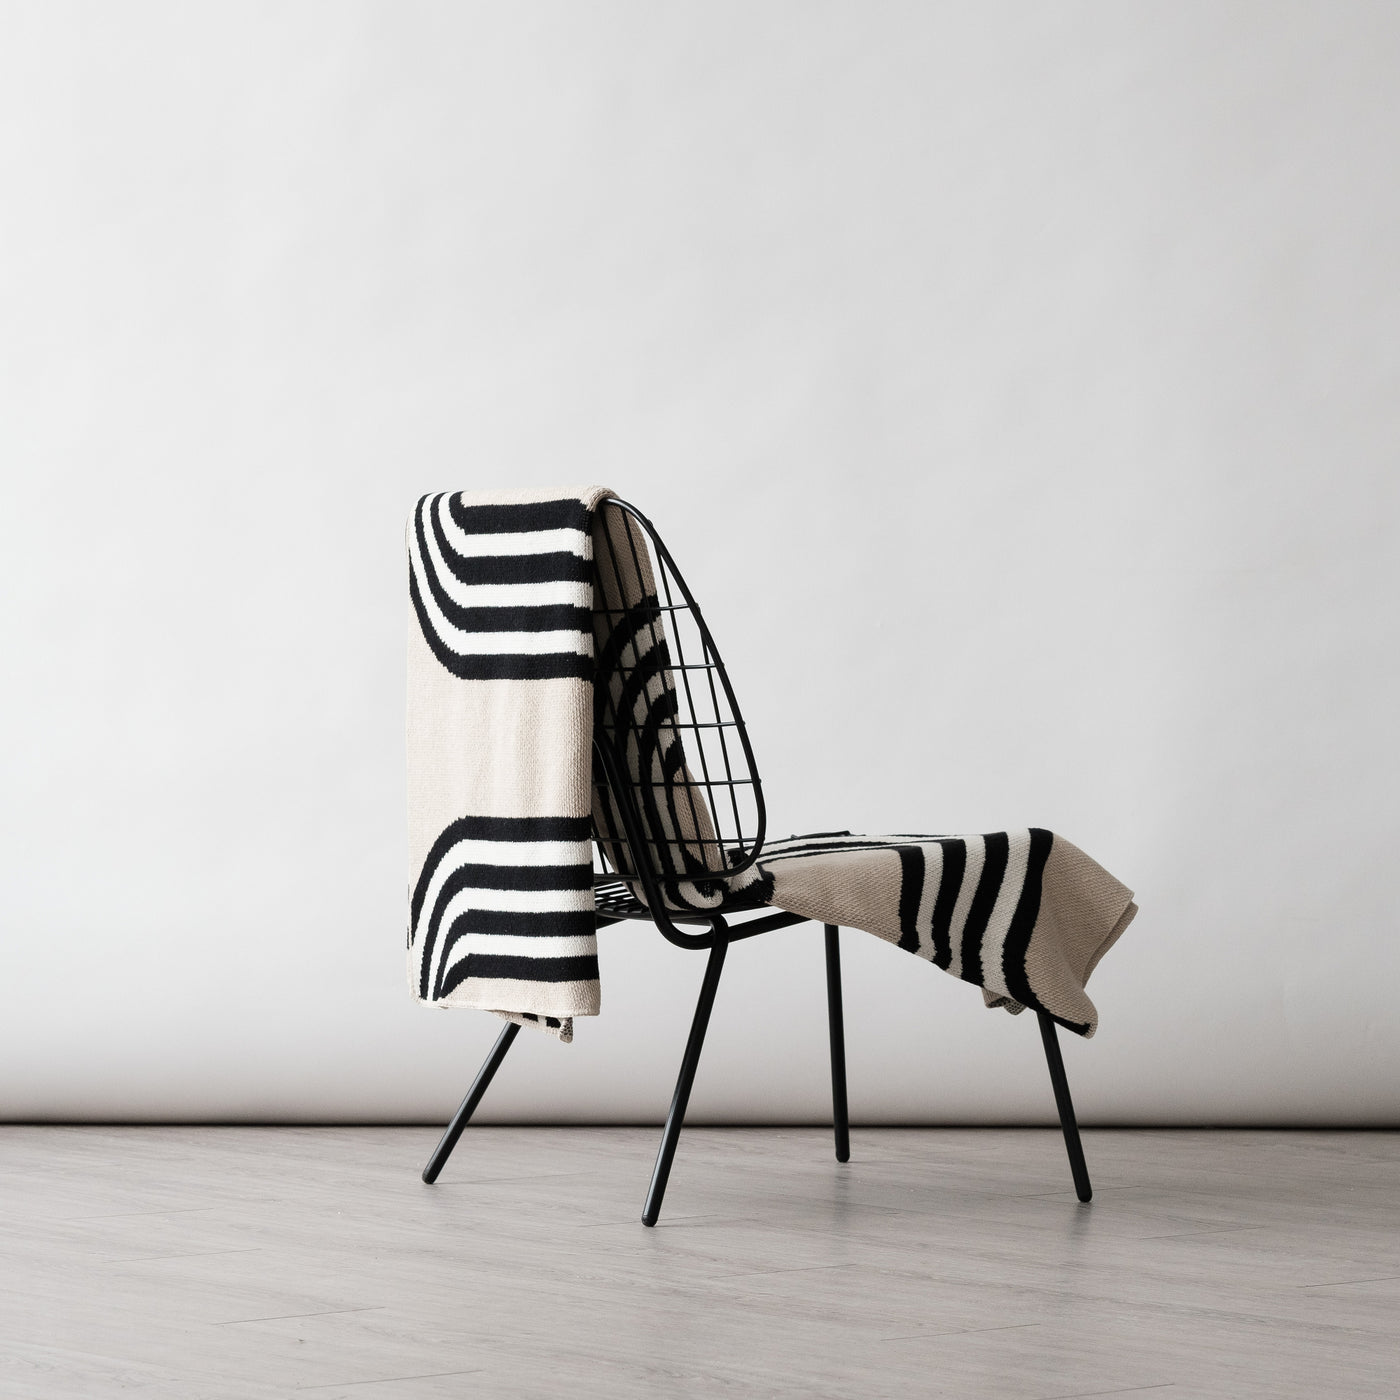 Low wire black chair with a modern beige throw